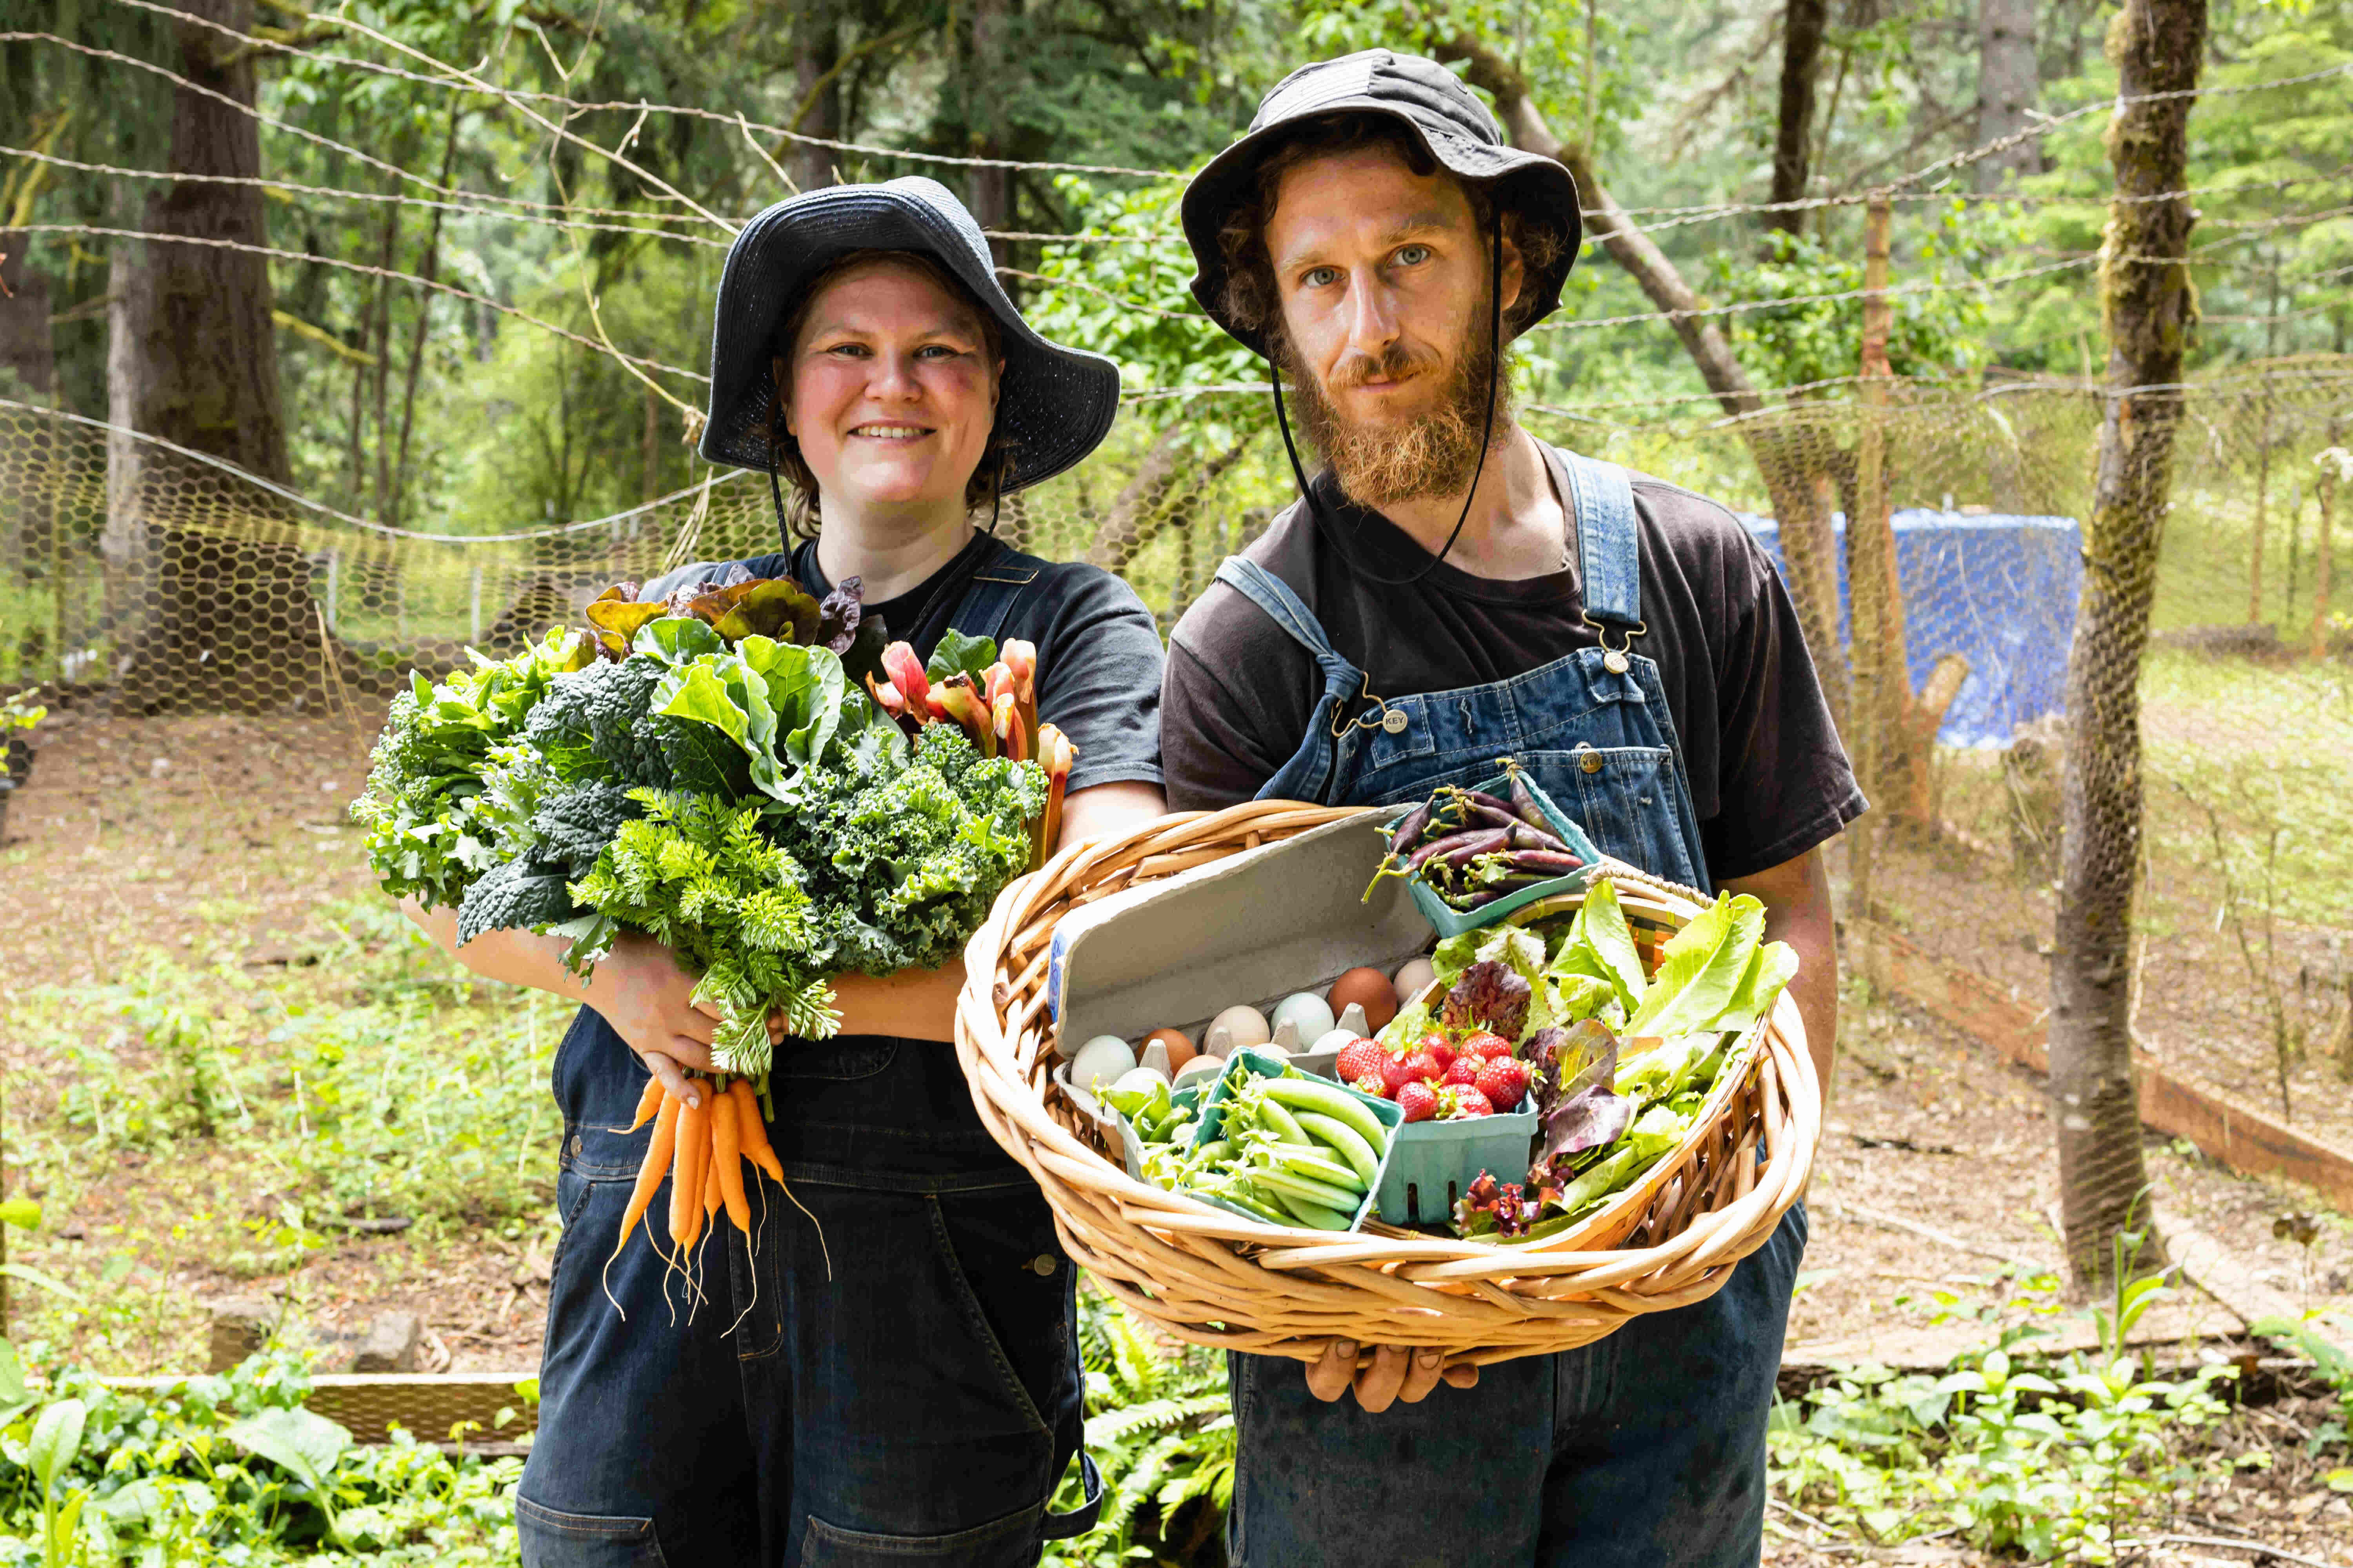 Farmers Cody and Linea Stand next to each other. Cody holds a basket filled with vegetables, eggs, and strawberries. Linea has her arm full of bundles of Kale and a dangling bunch of carrots.